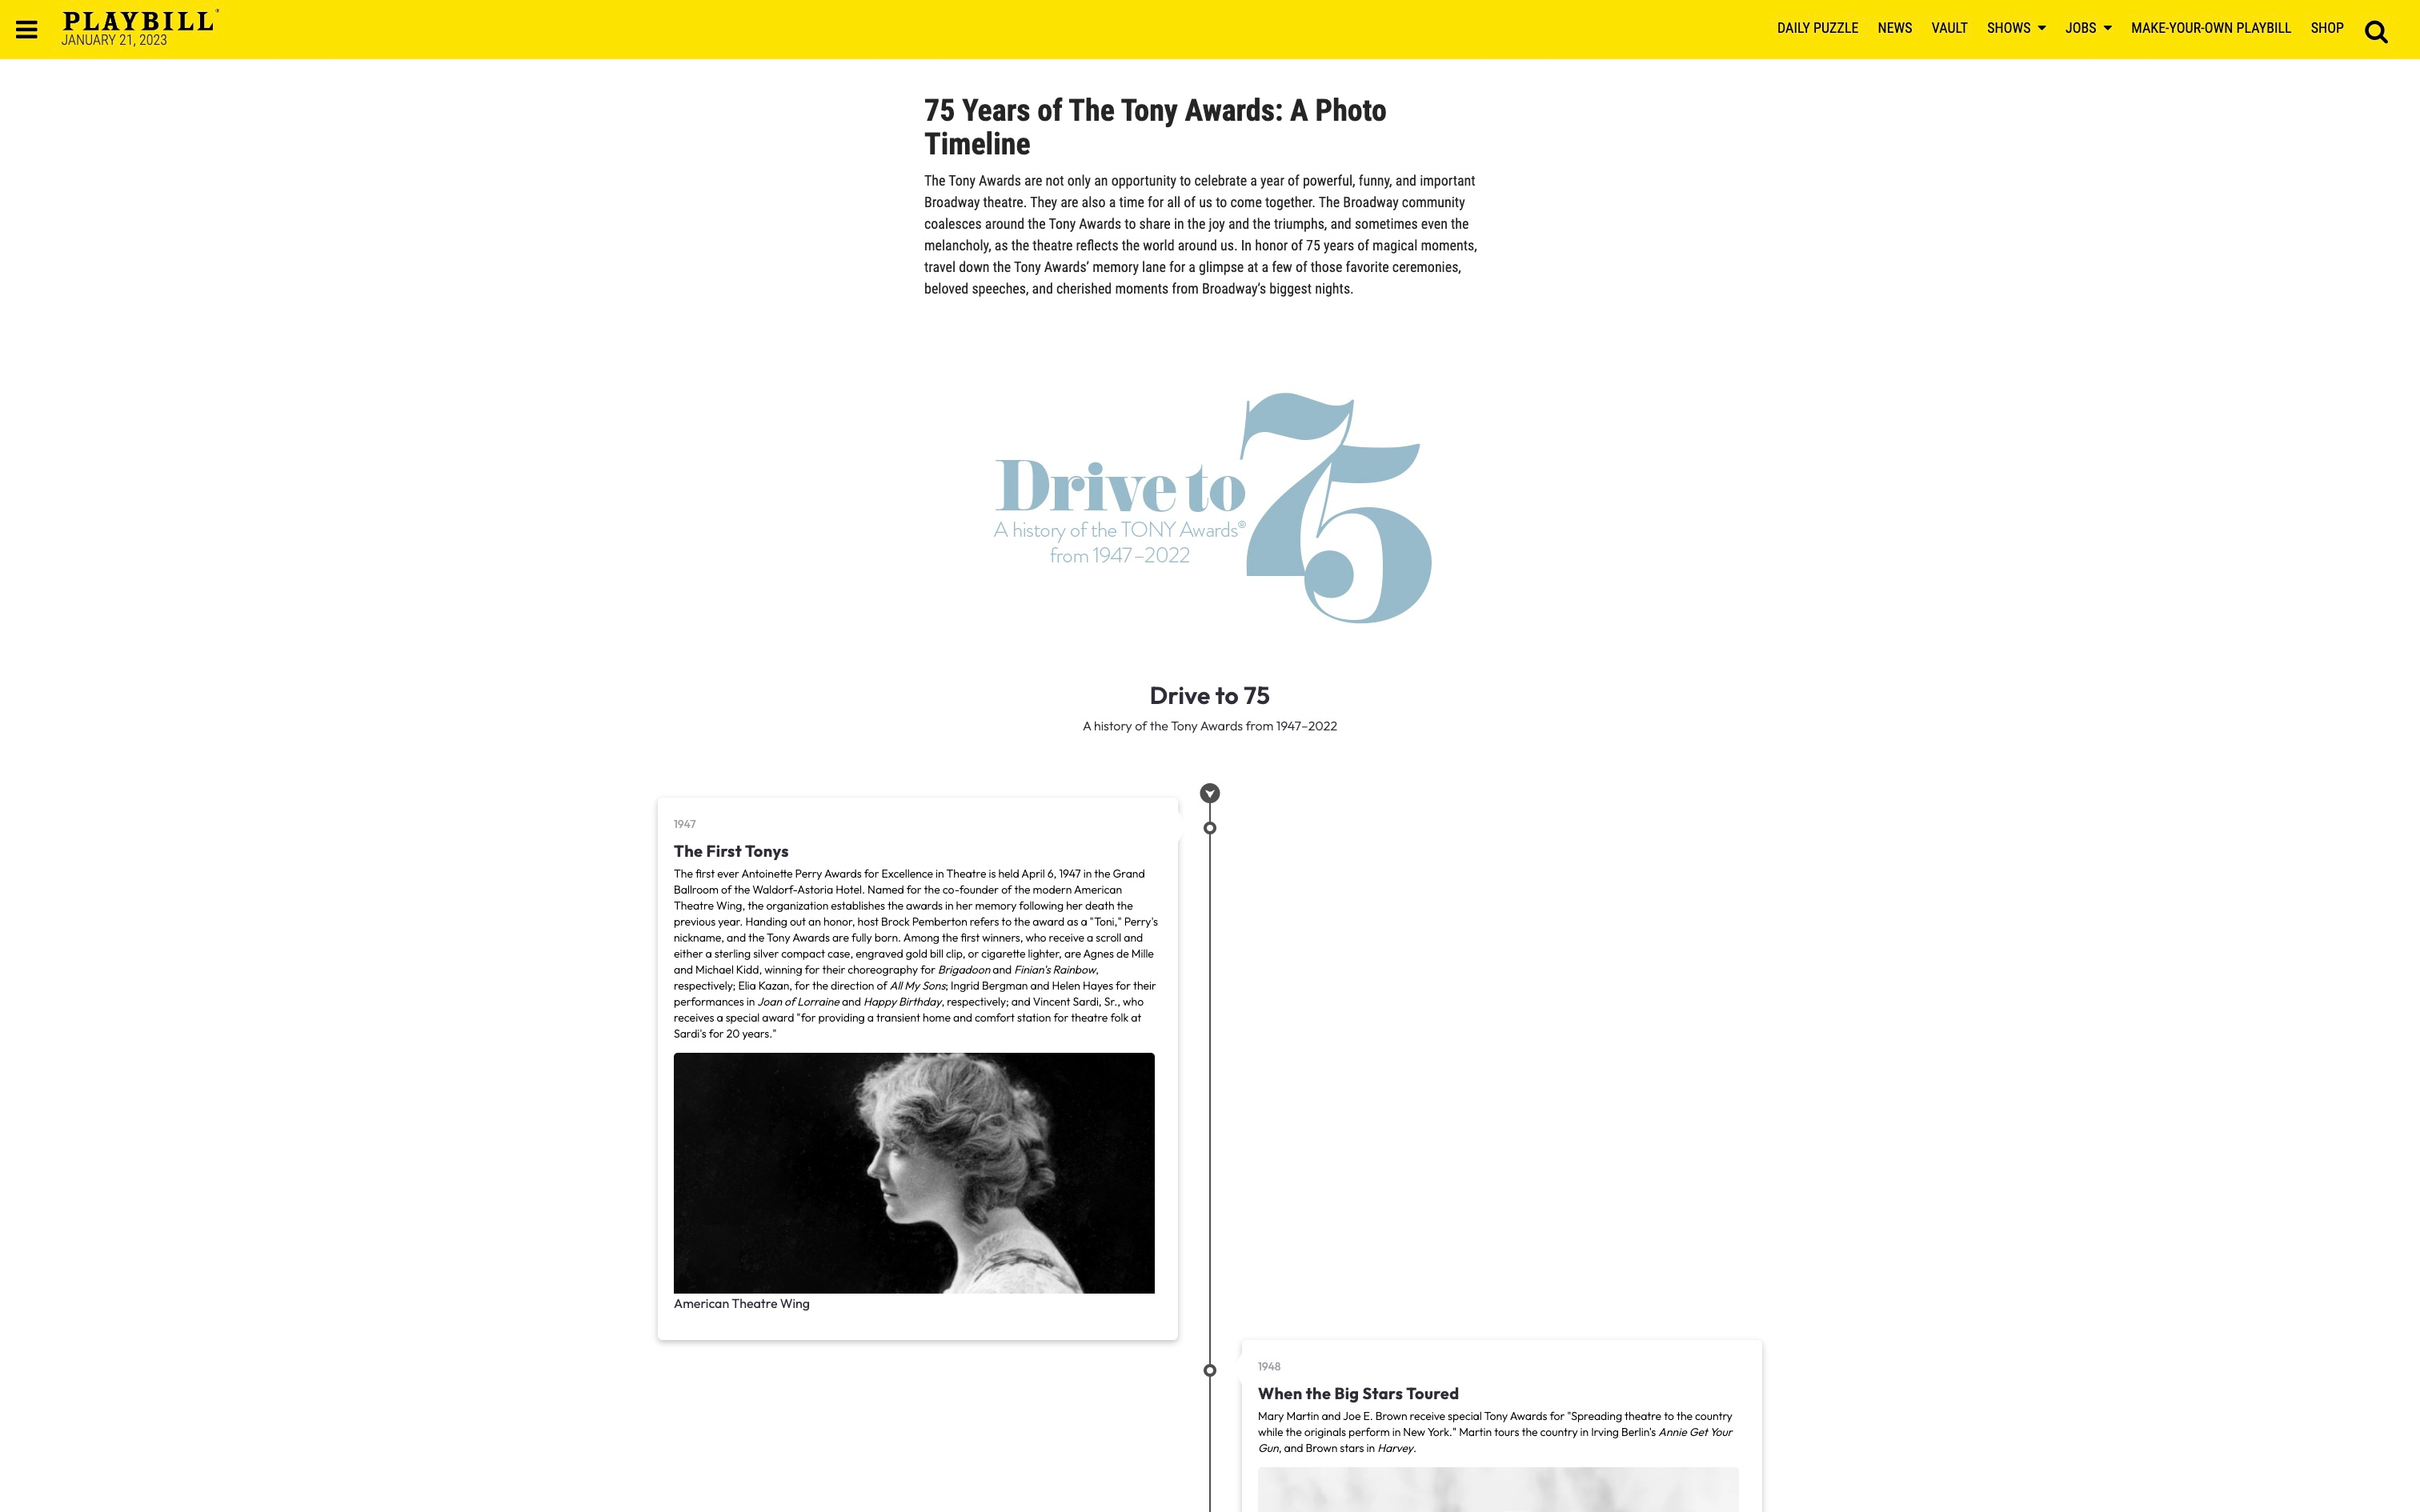 <h2>Playbill publish first timeline</h2>